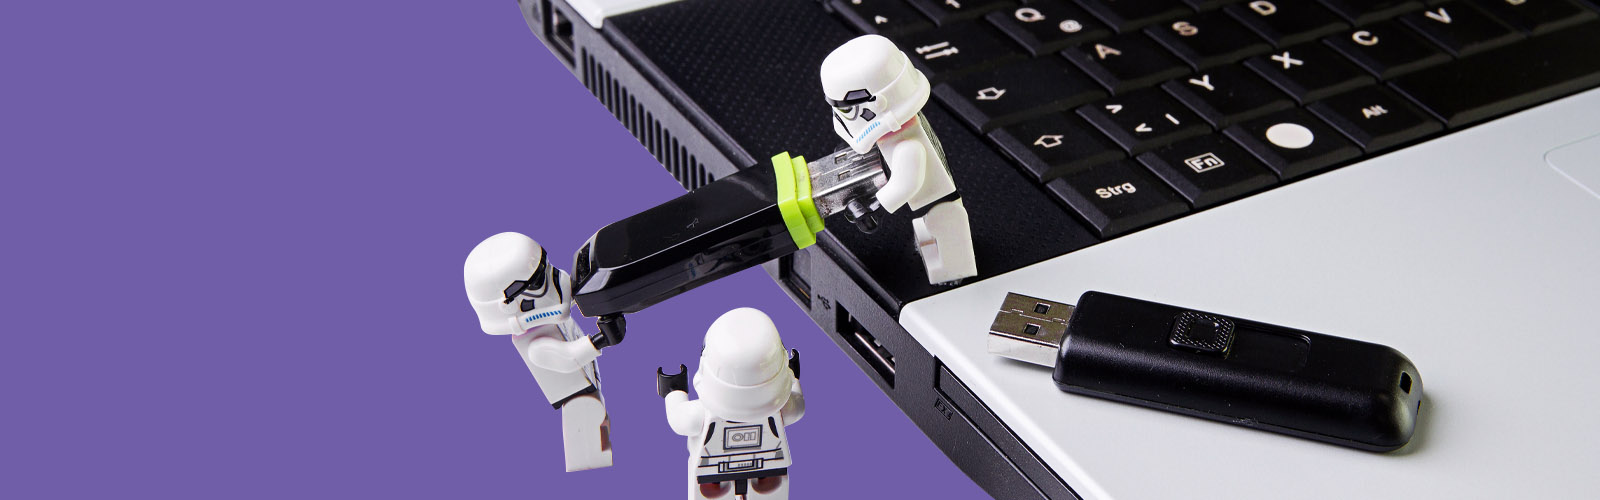 Lego Stormtroopers plugging in a USB stick